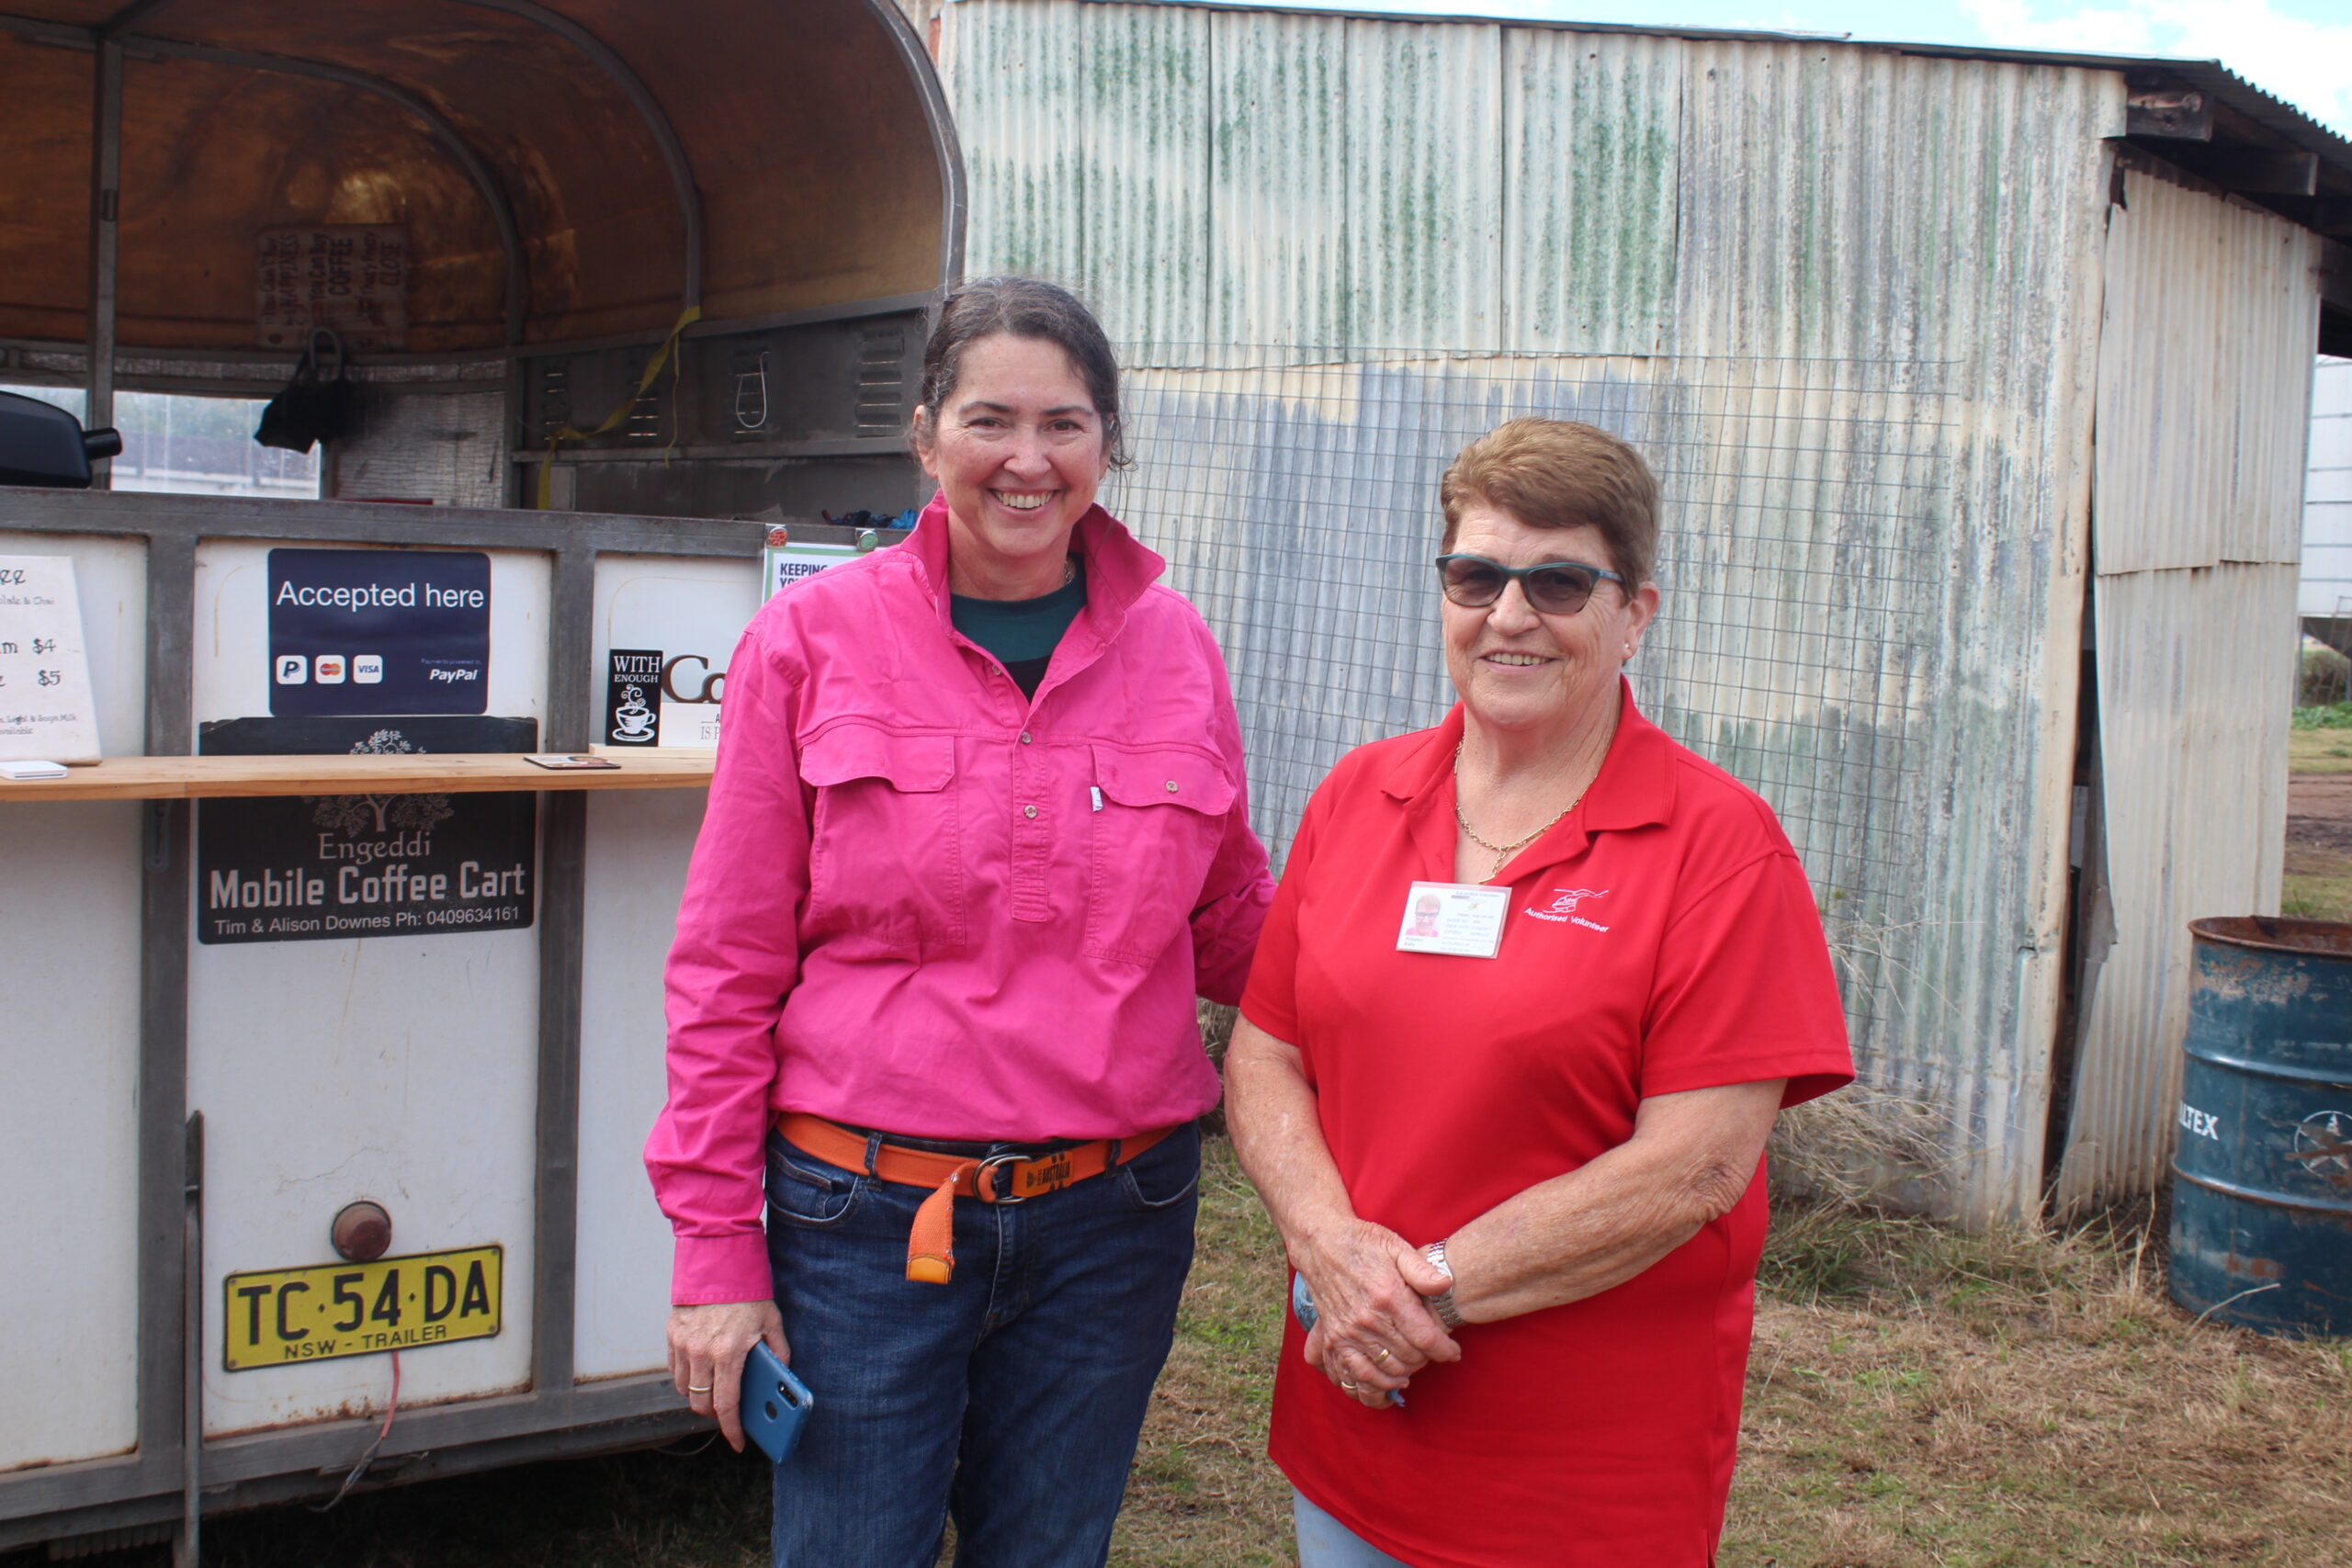 Alison Downes and Westpac Rescue Helicopter volunteer Ros Kelly, in front of the Engeddi Mobile Coffee Cart.